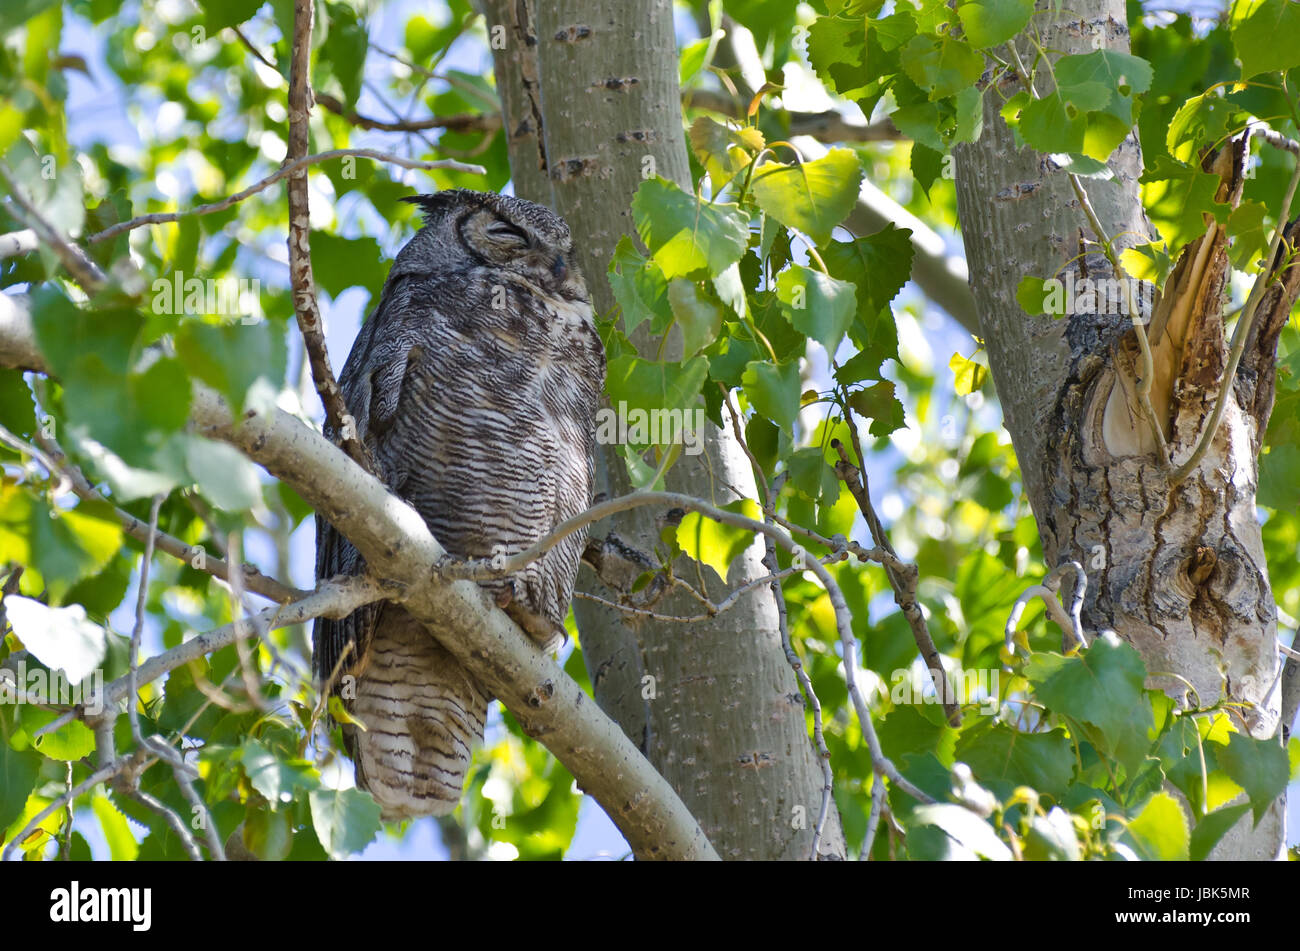 Great Horned Owl Perched on a Branch in a Tree Stock Photo